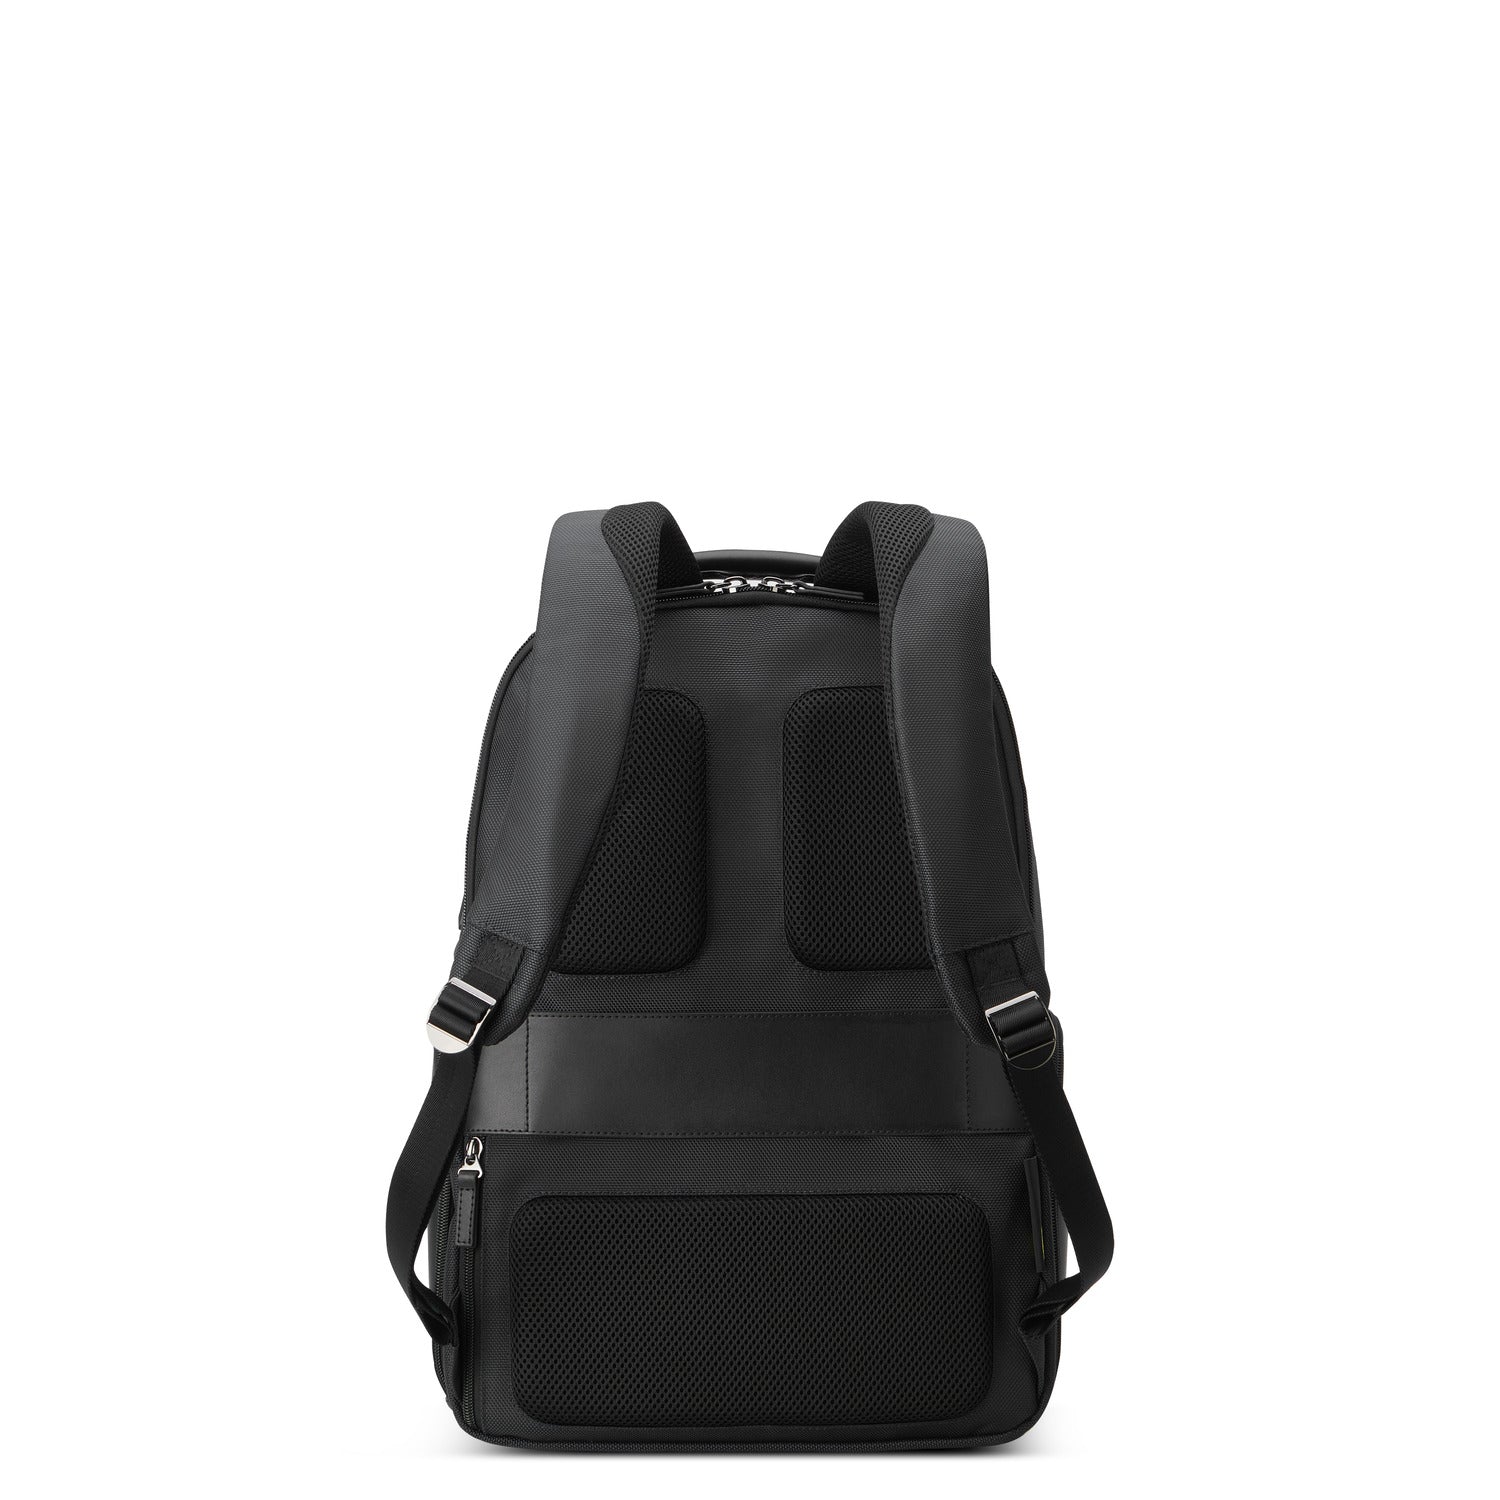 Delsey Wagram Compartment Backpack Laptop  15.6 inch  Black - 00119961000